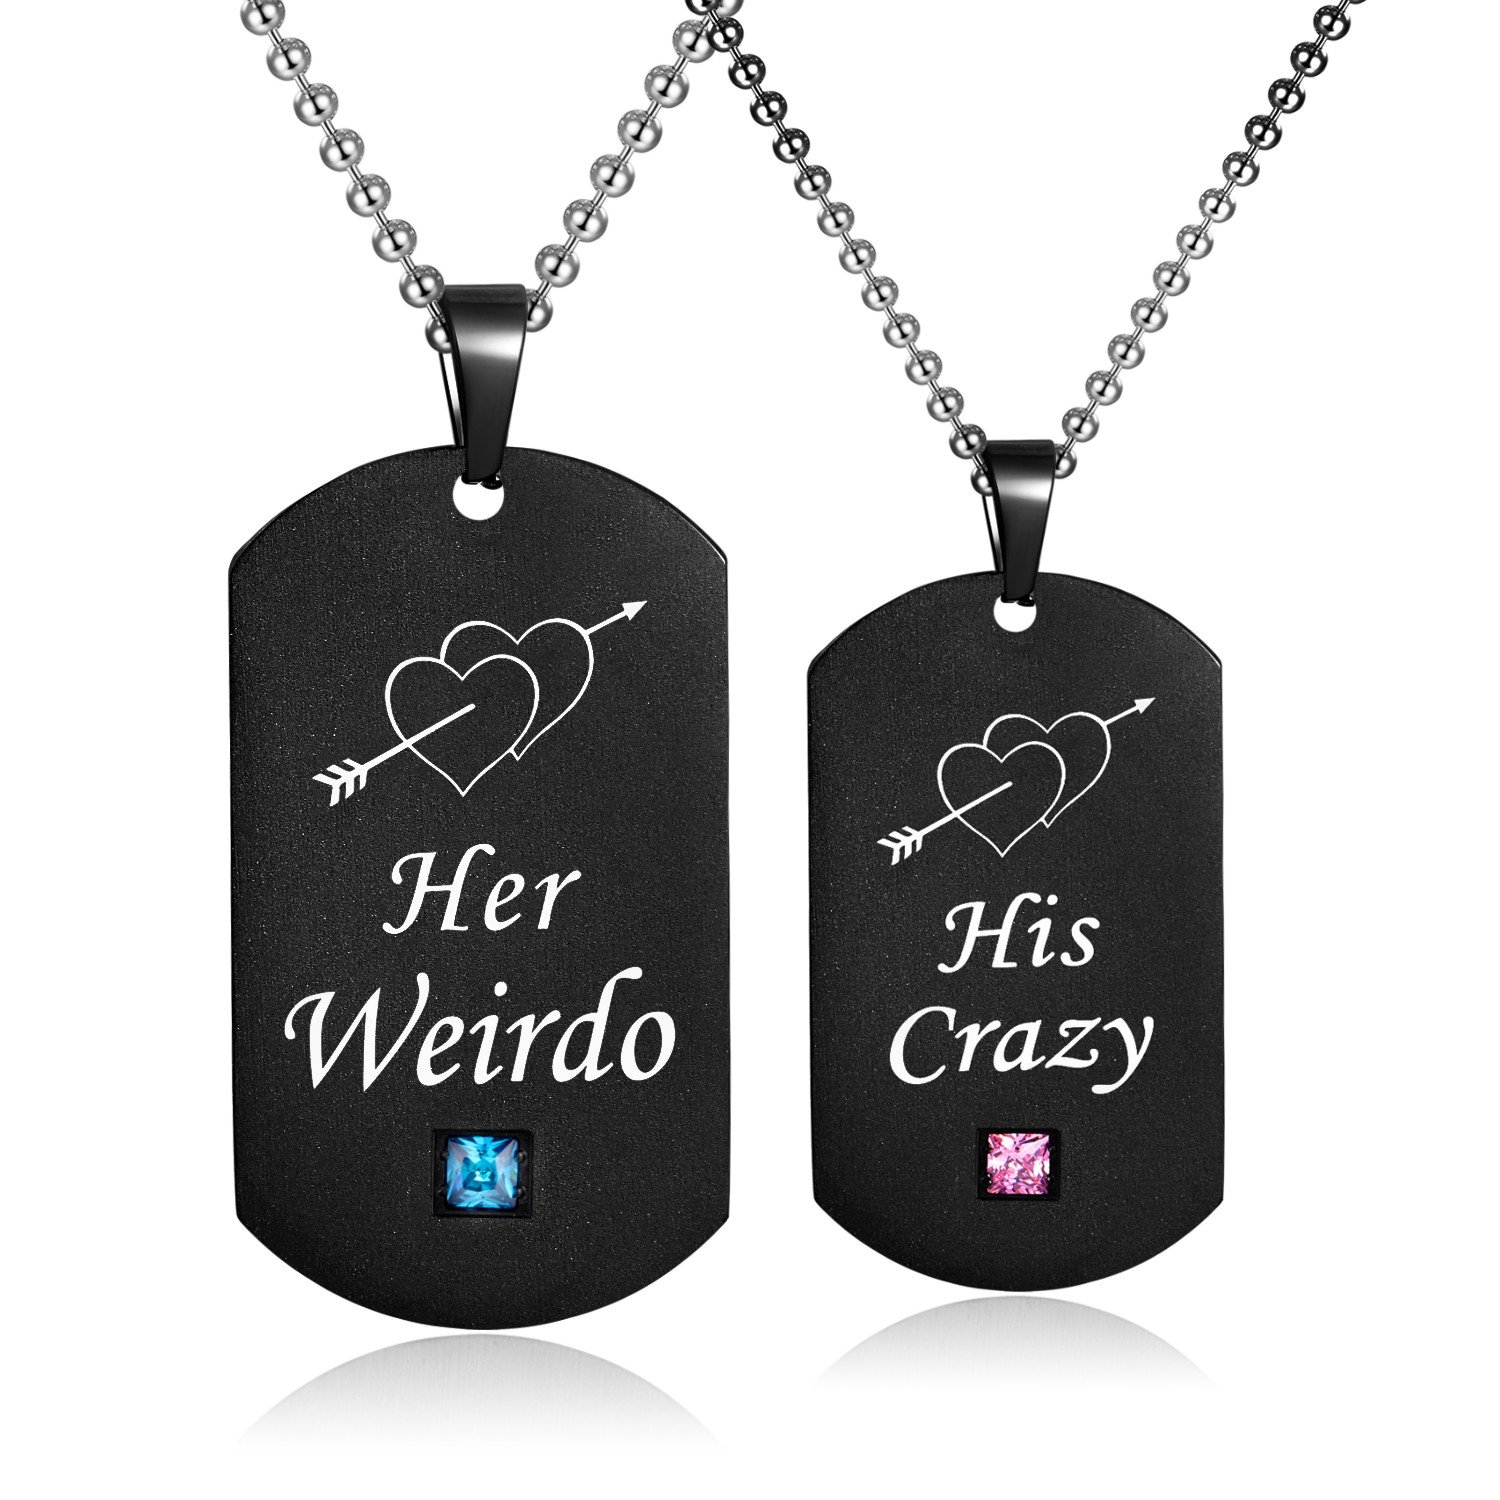 SunnyHouse Jewelry His & Hers Matching Set Titanium Stainless Steel His Crazy Her Weirdo Couple Pendant Necklace in a Gift Box (A PAIR)